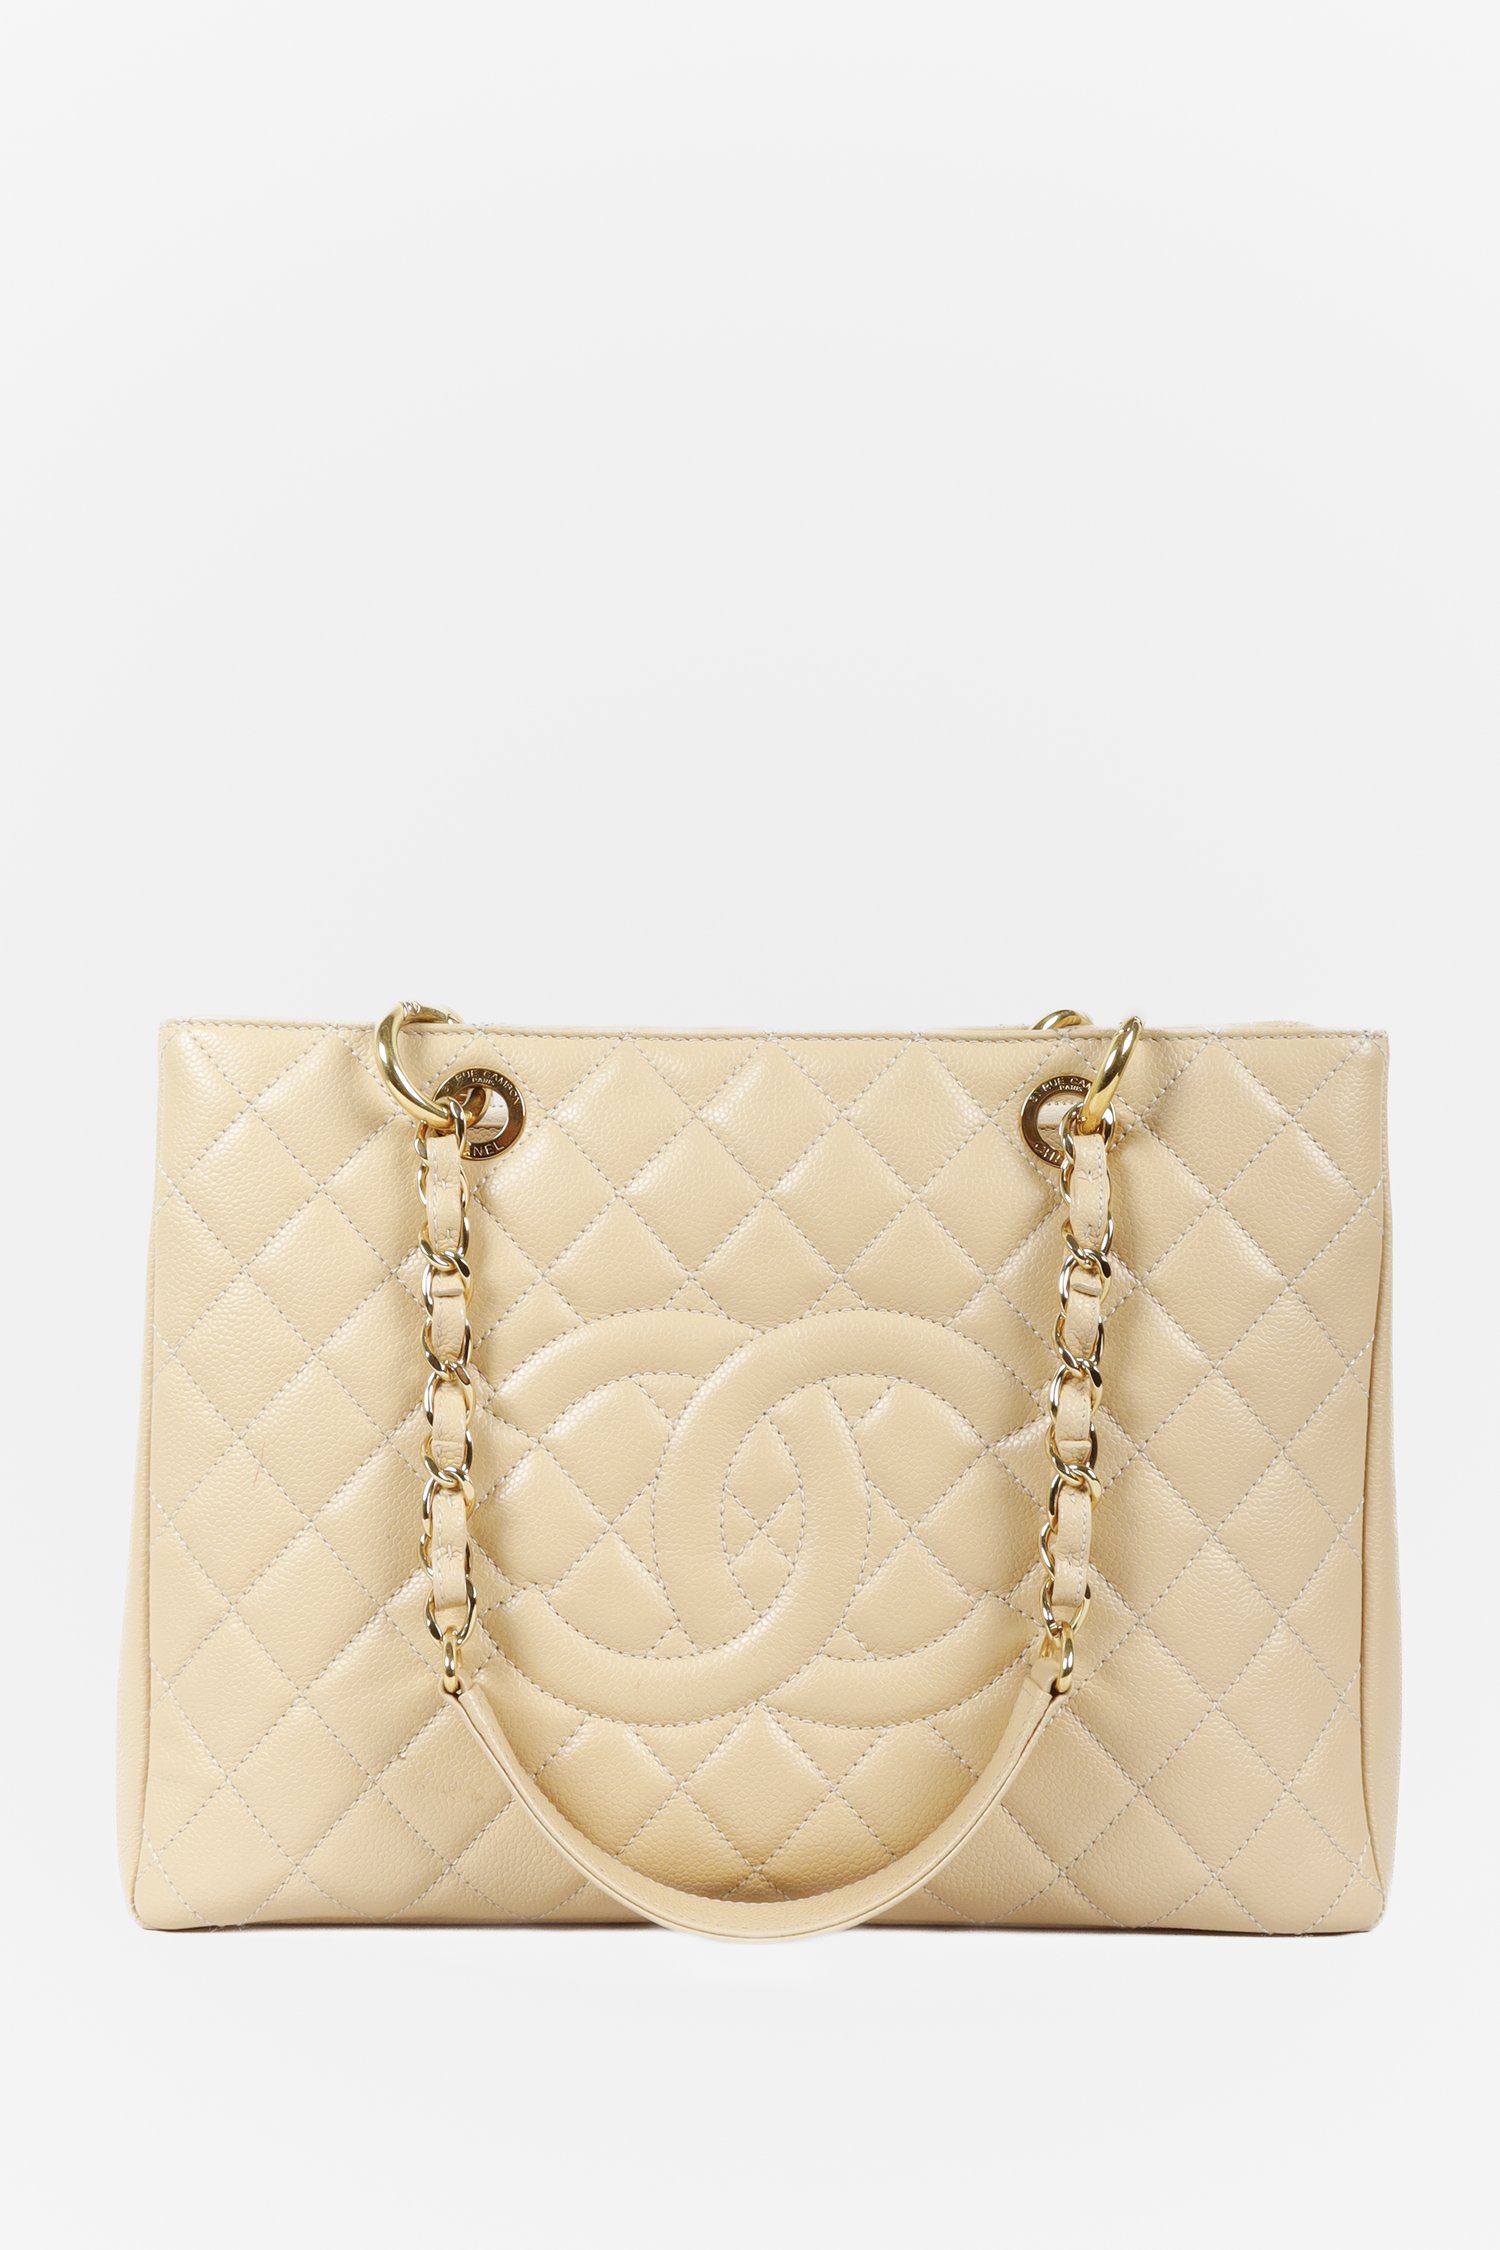 chanel beige tote